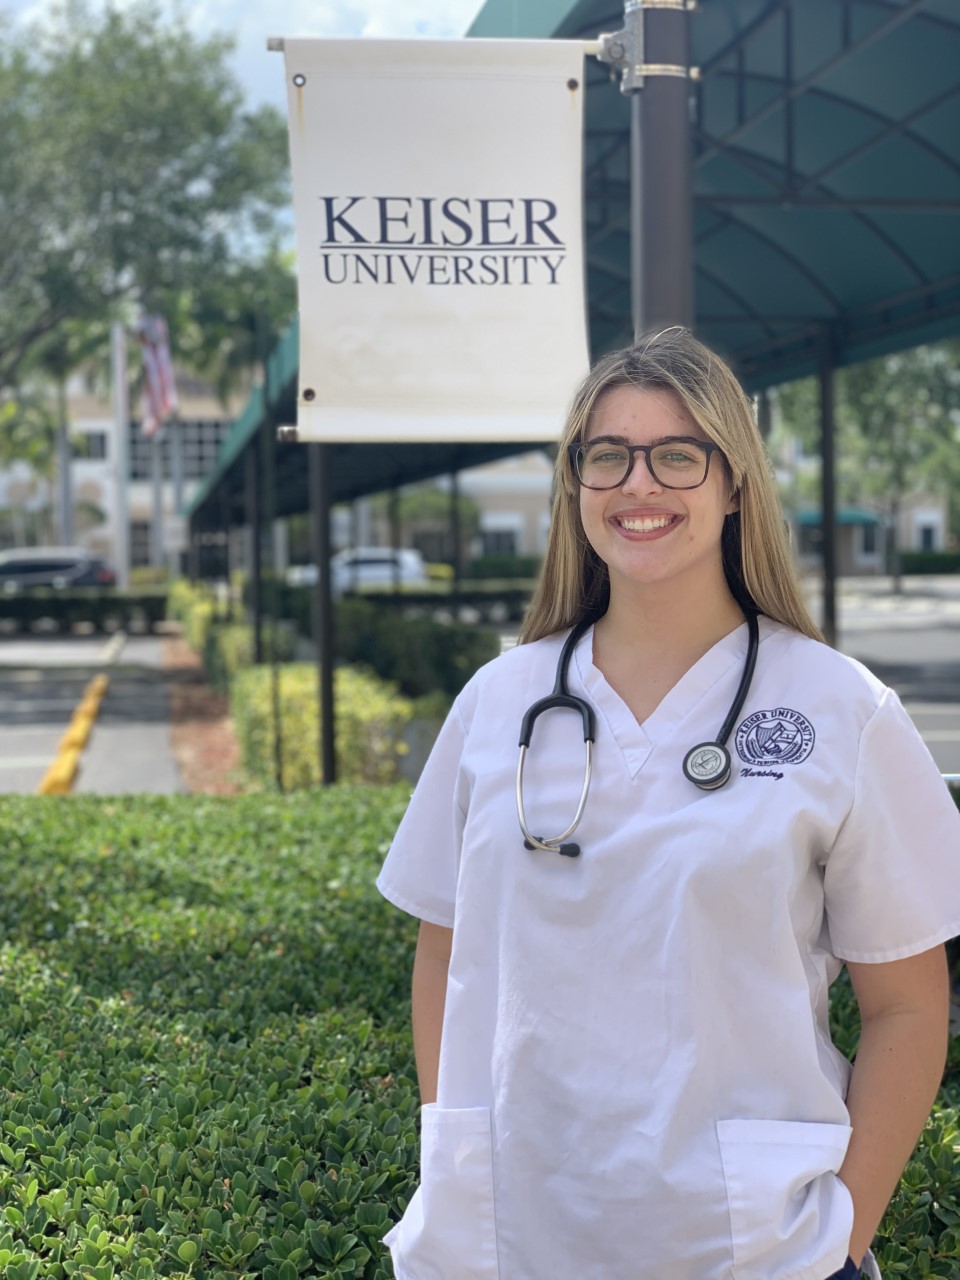 Thankful for the EASE Grant, Keiser University Student Recognizes the Critical Role of Healthcare Professionals